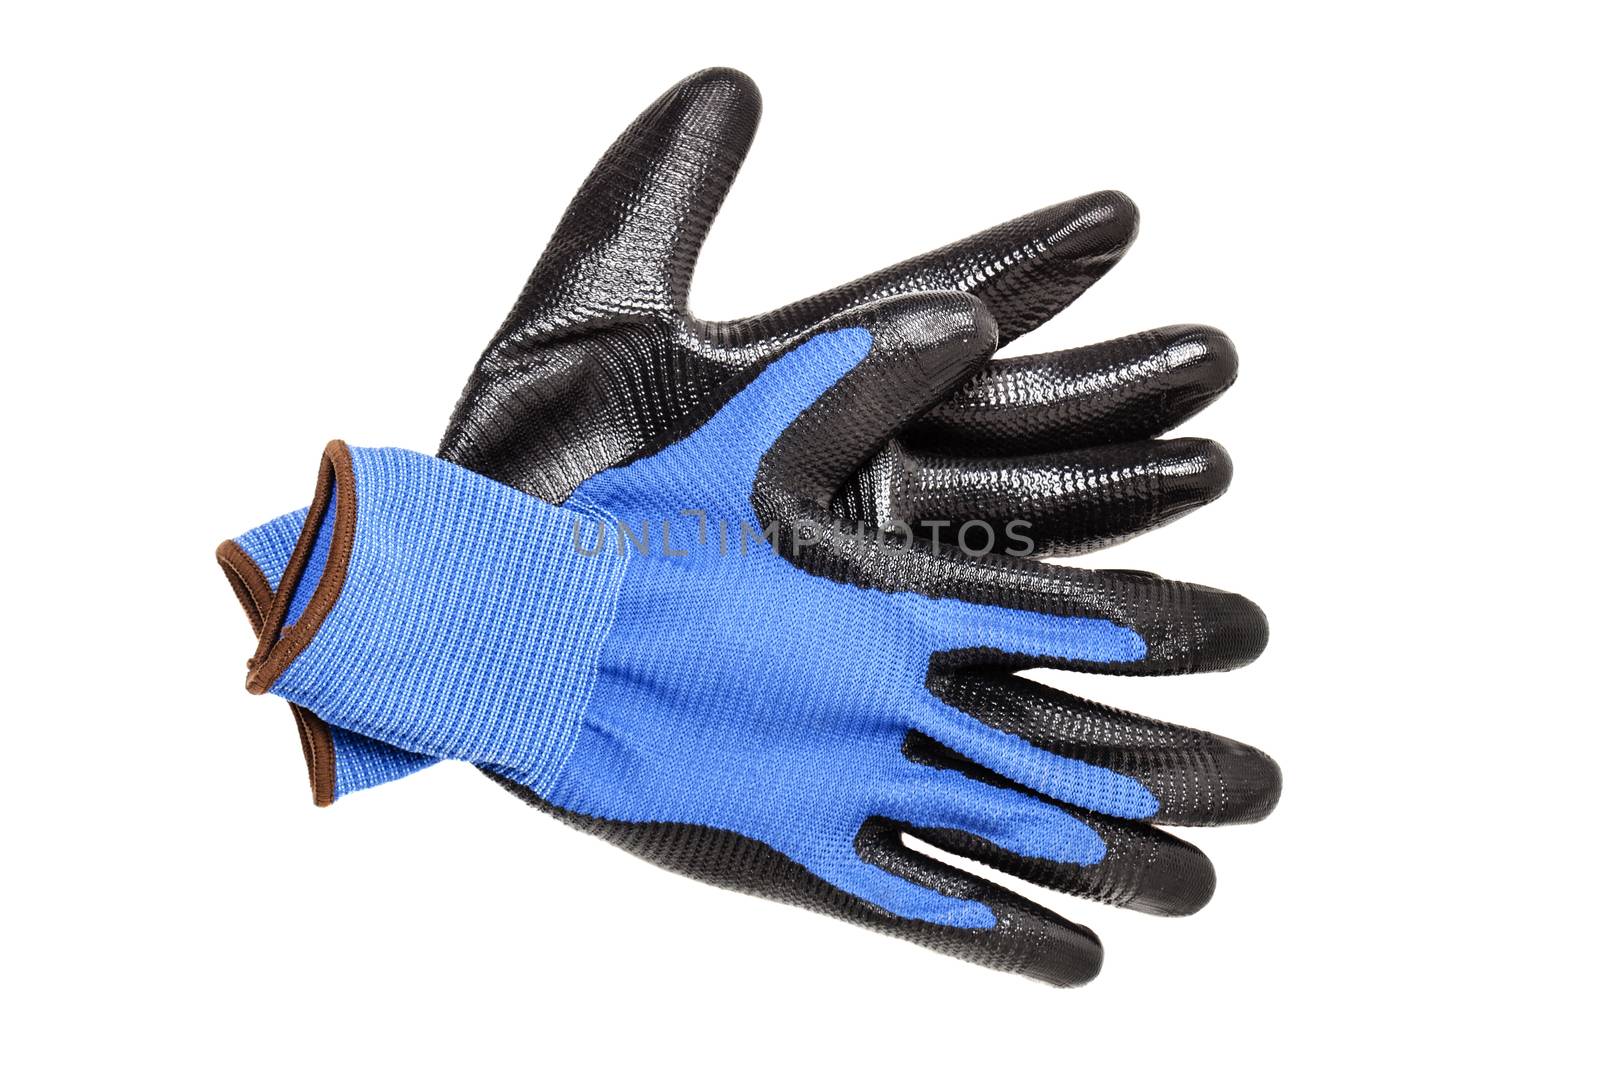 blue protective gloves by kokimk